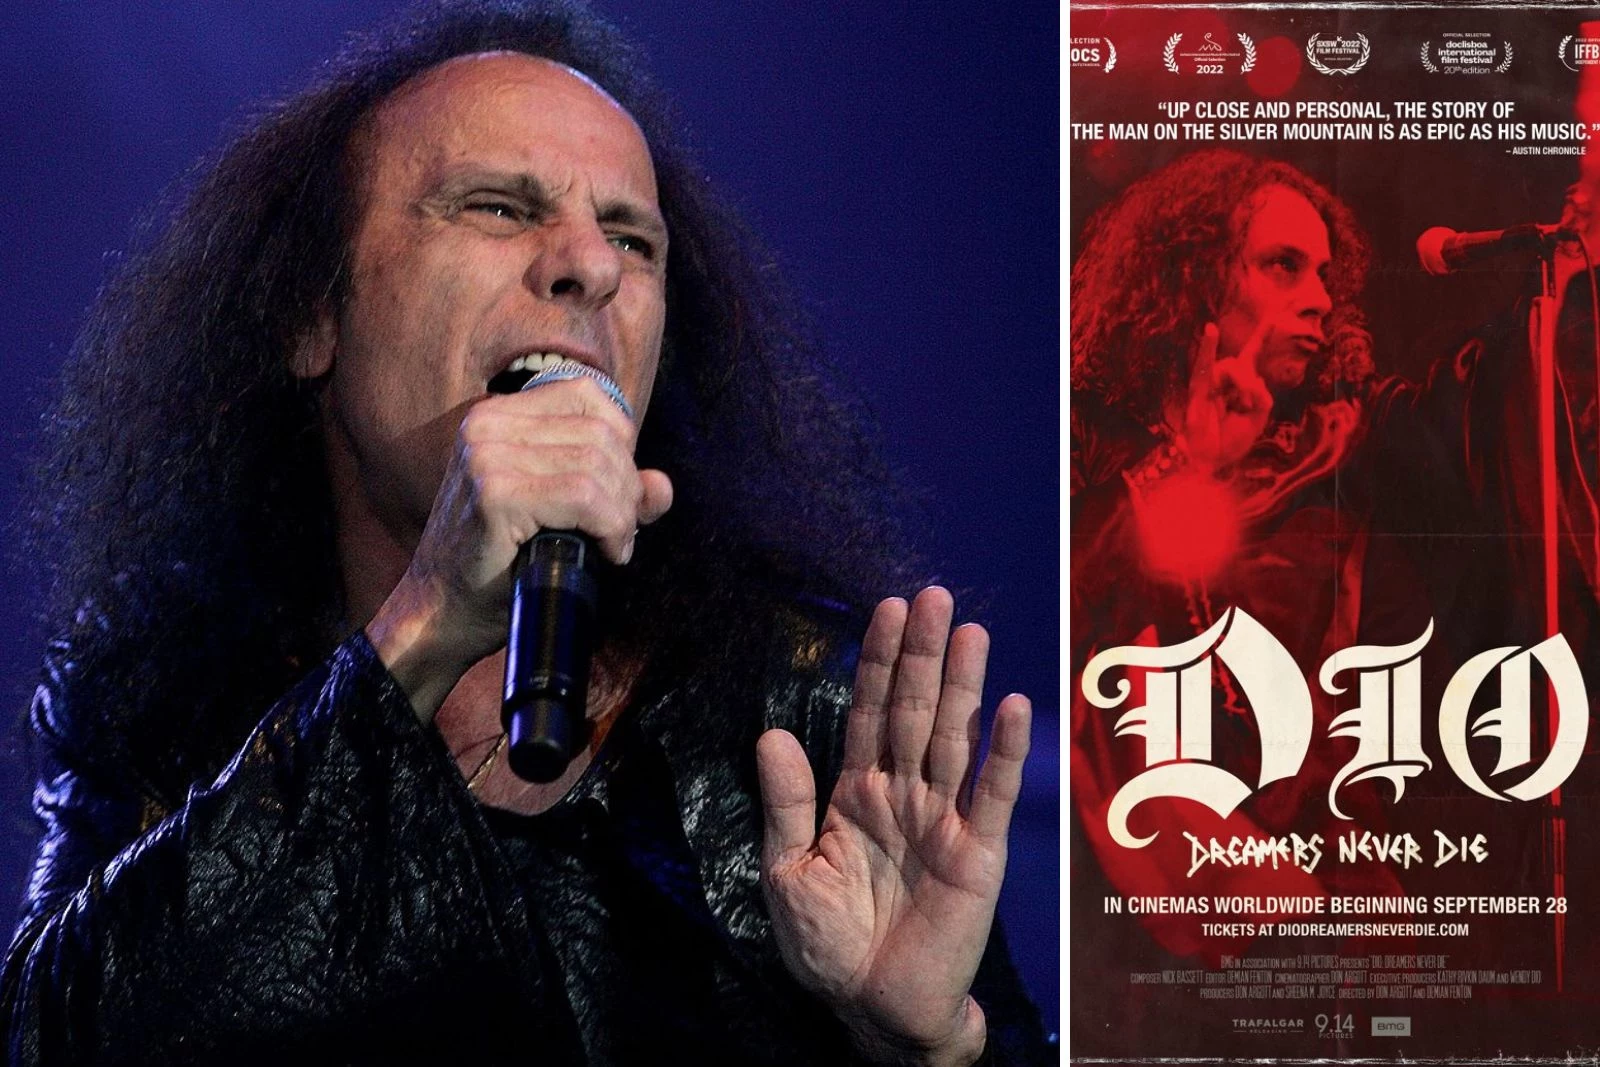 Cortland's Most Powerful Voice: A Review of the New Dio Movie